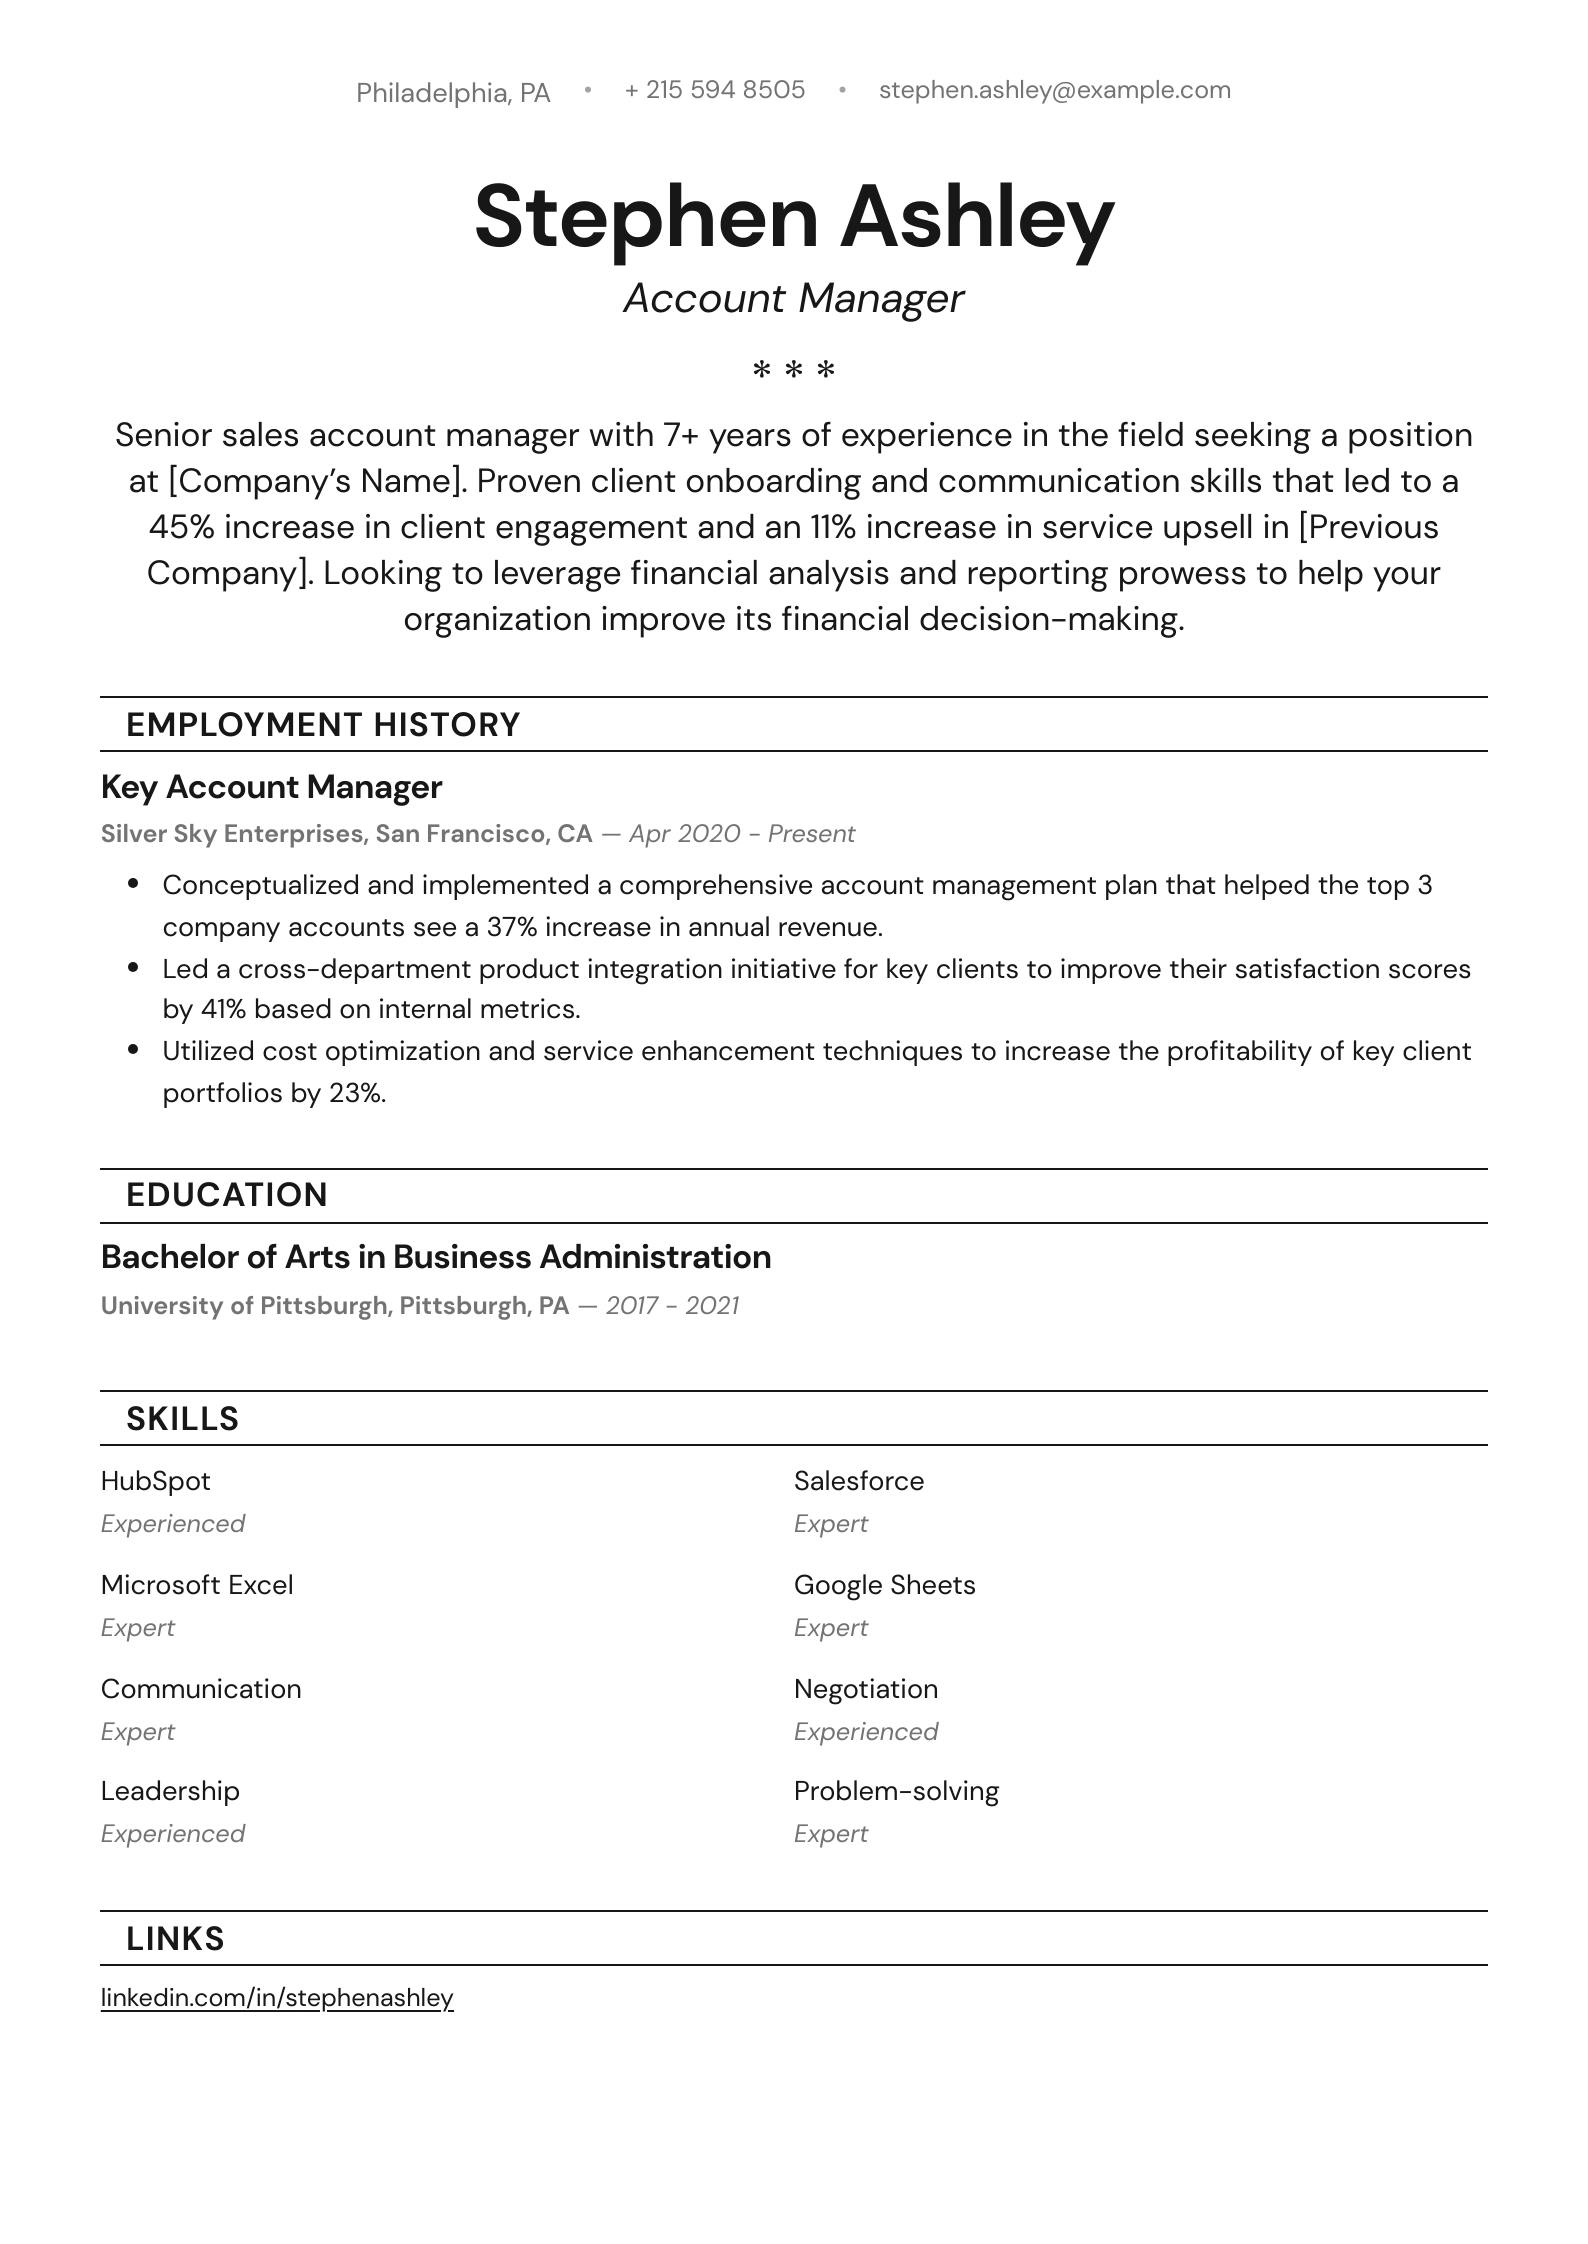 Account Manager Resume Example